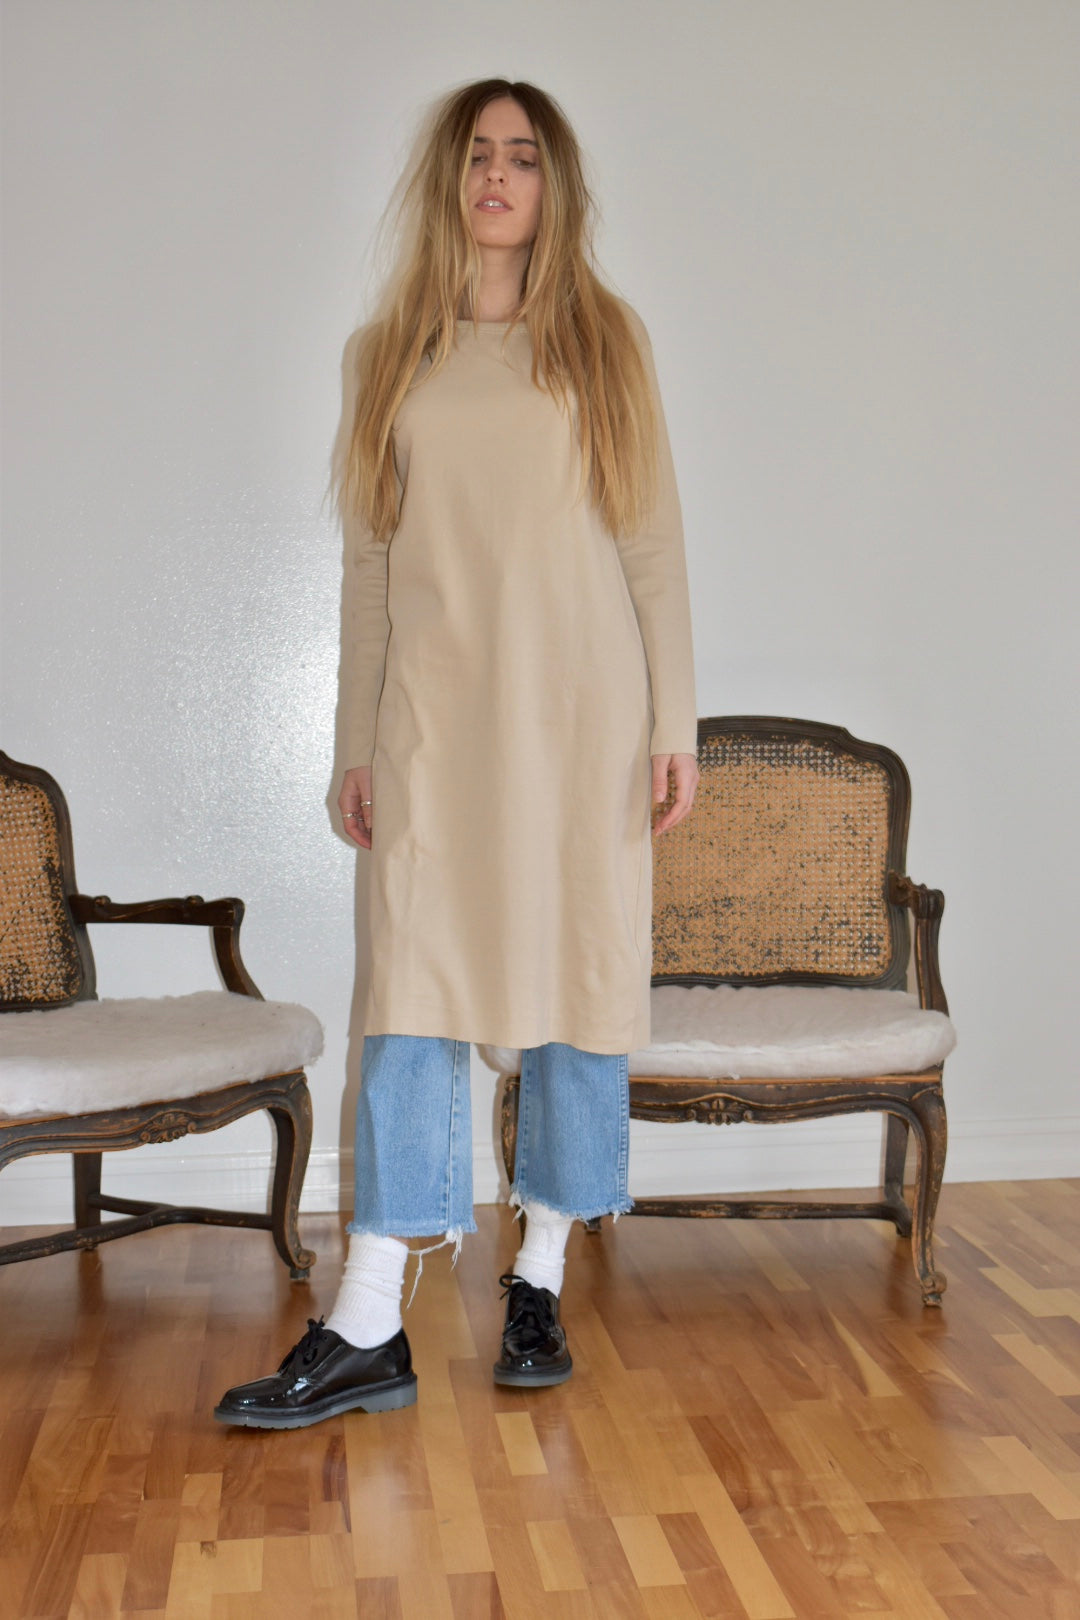 Dare (On Elbows), Long Sleeved Dress - Also, Freedom